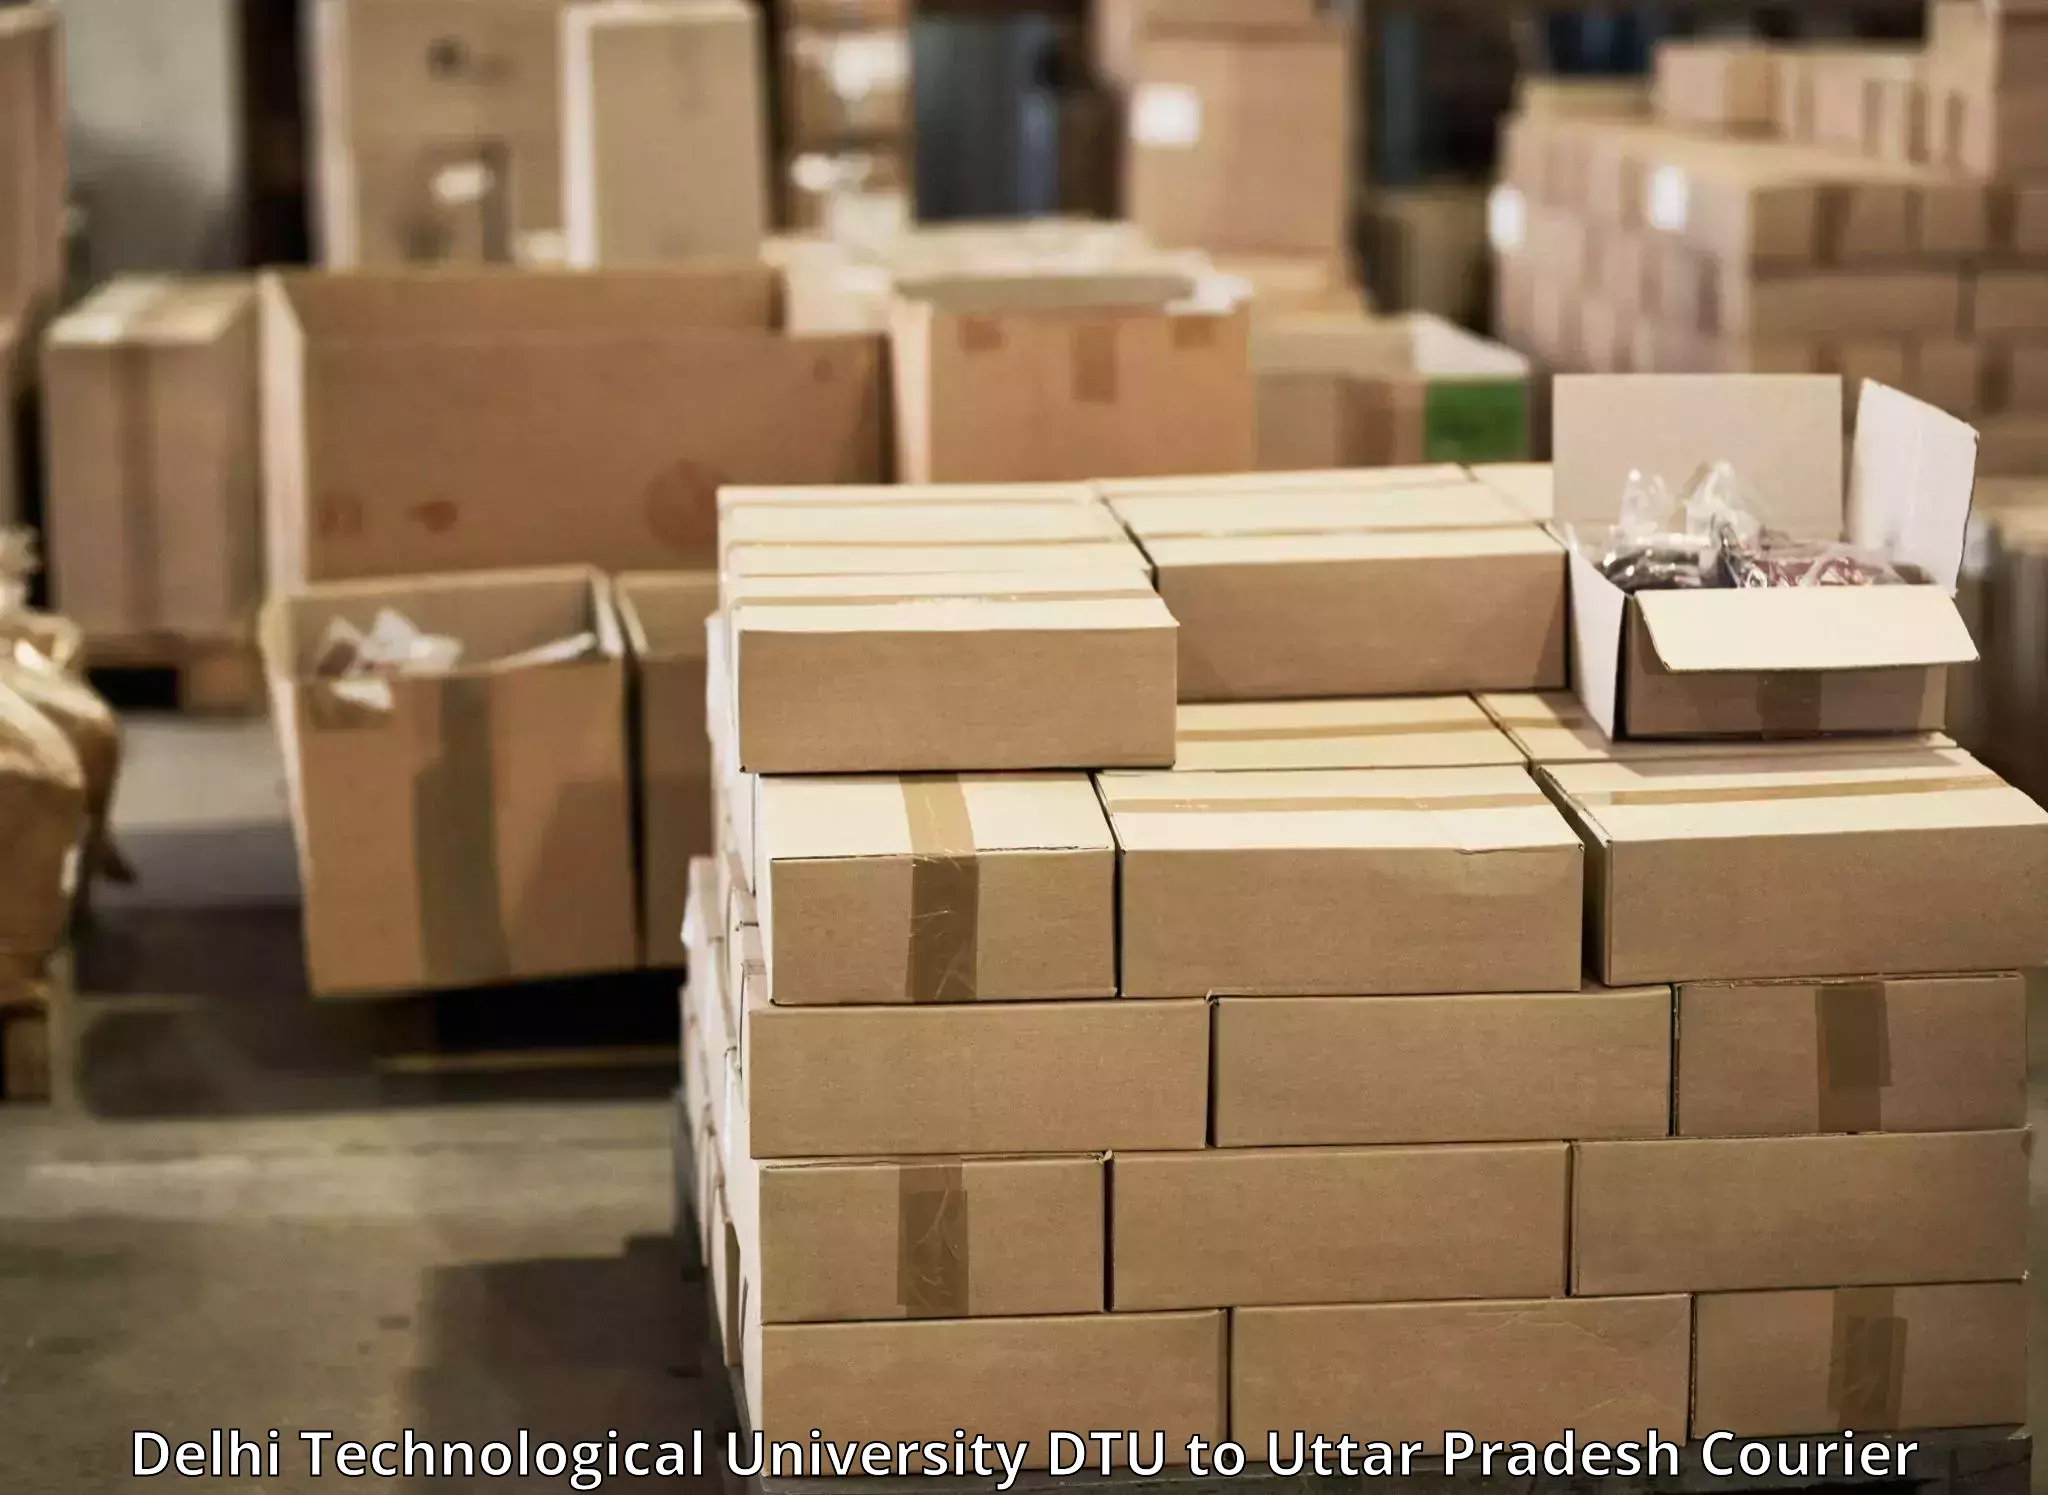 Round-the-clock parcel delivery in Delhi Technological University DTU to Bidhuna